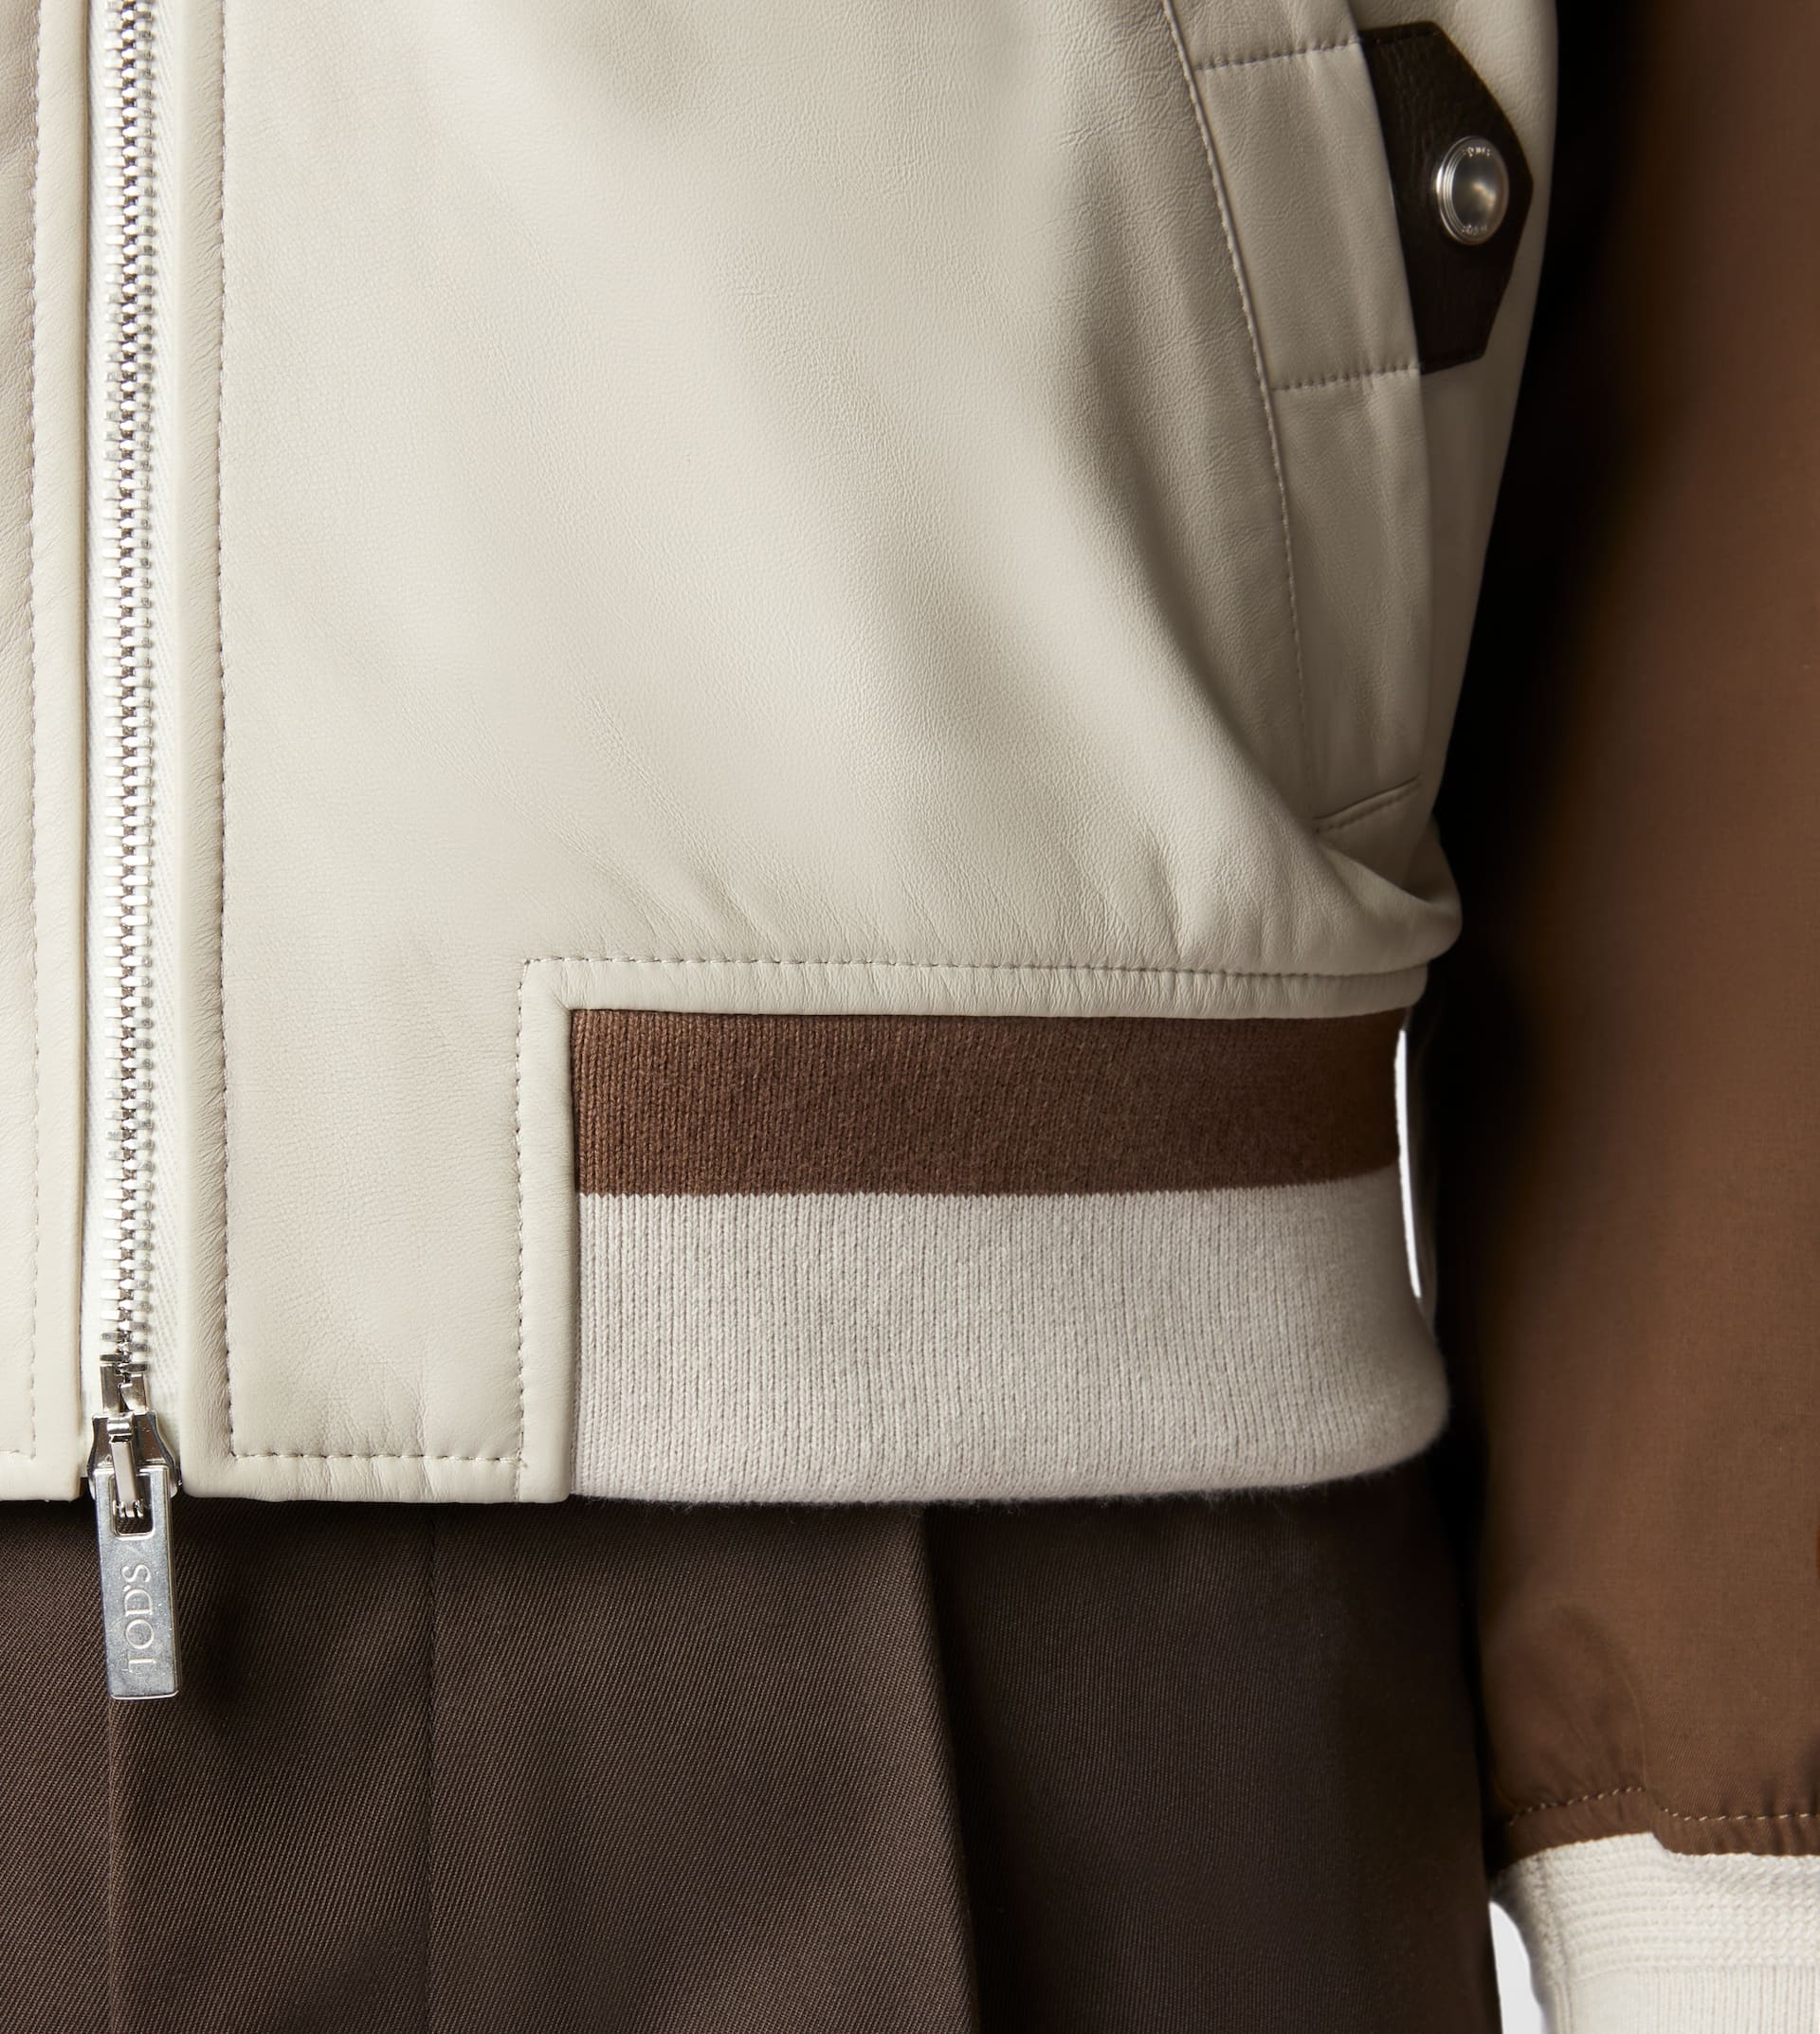 BOMBER JACKET IN LEATHER - BROWN, OFF WHITE - 5